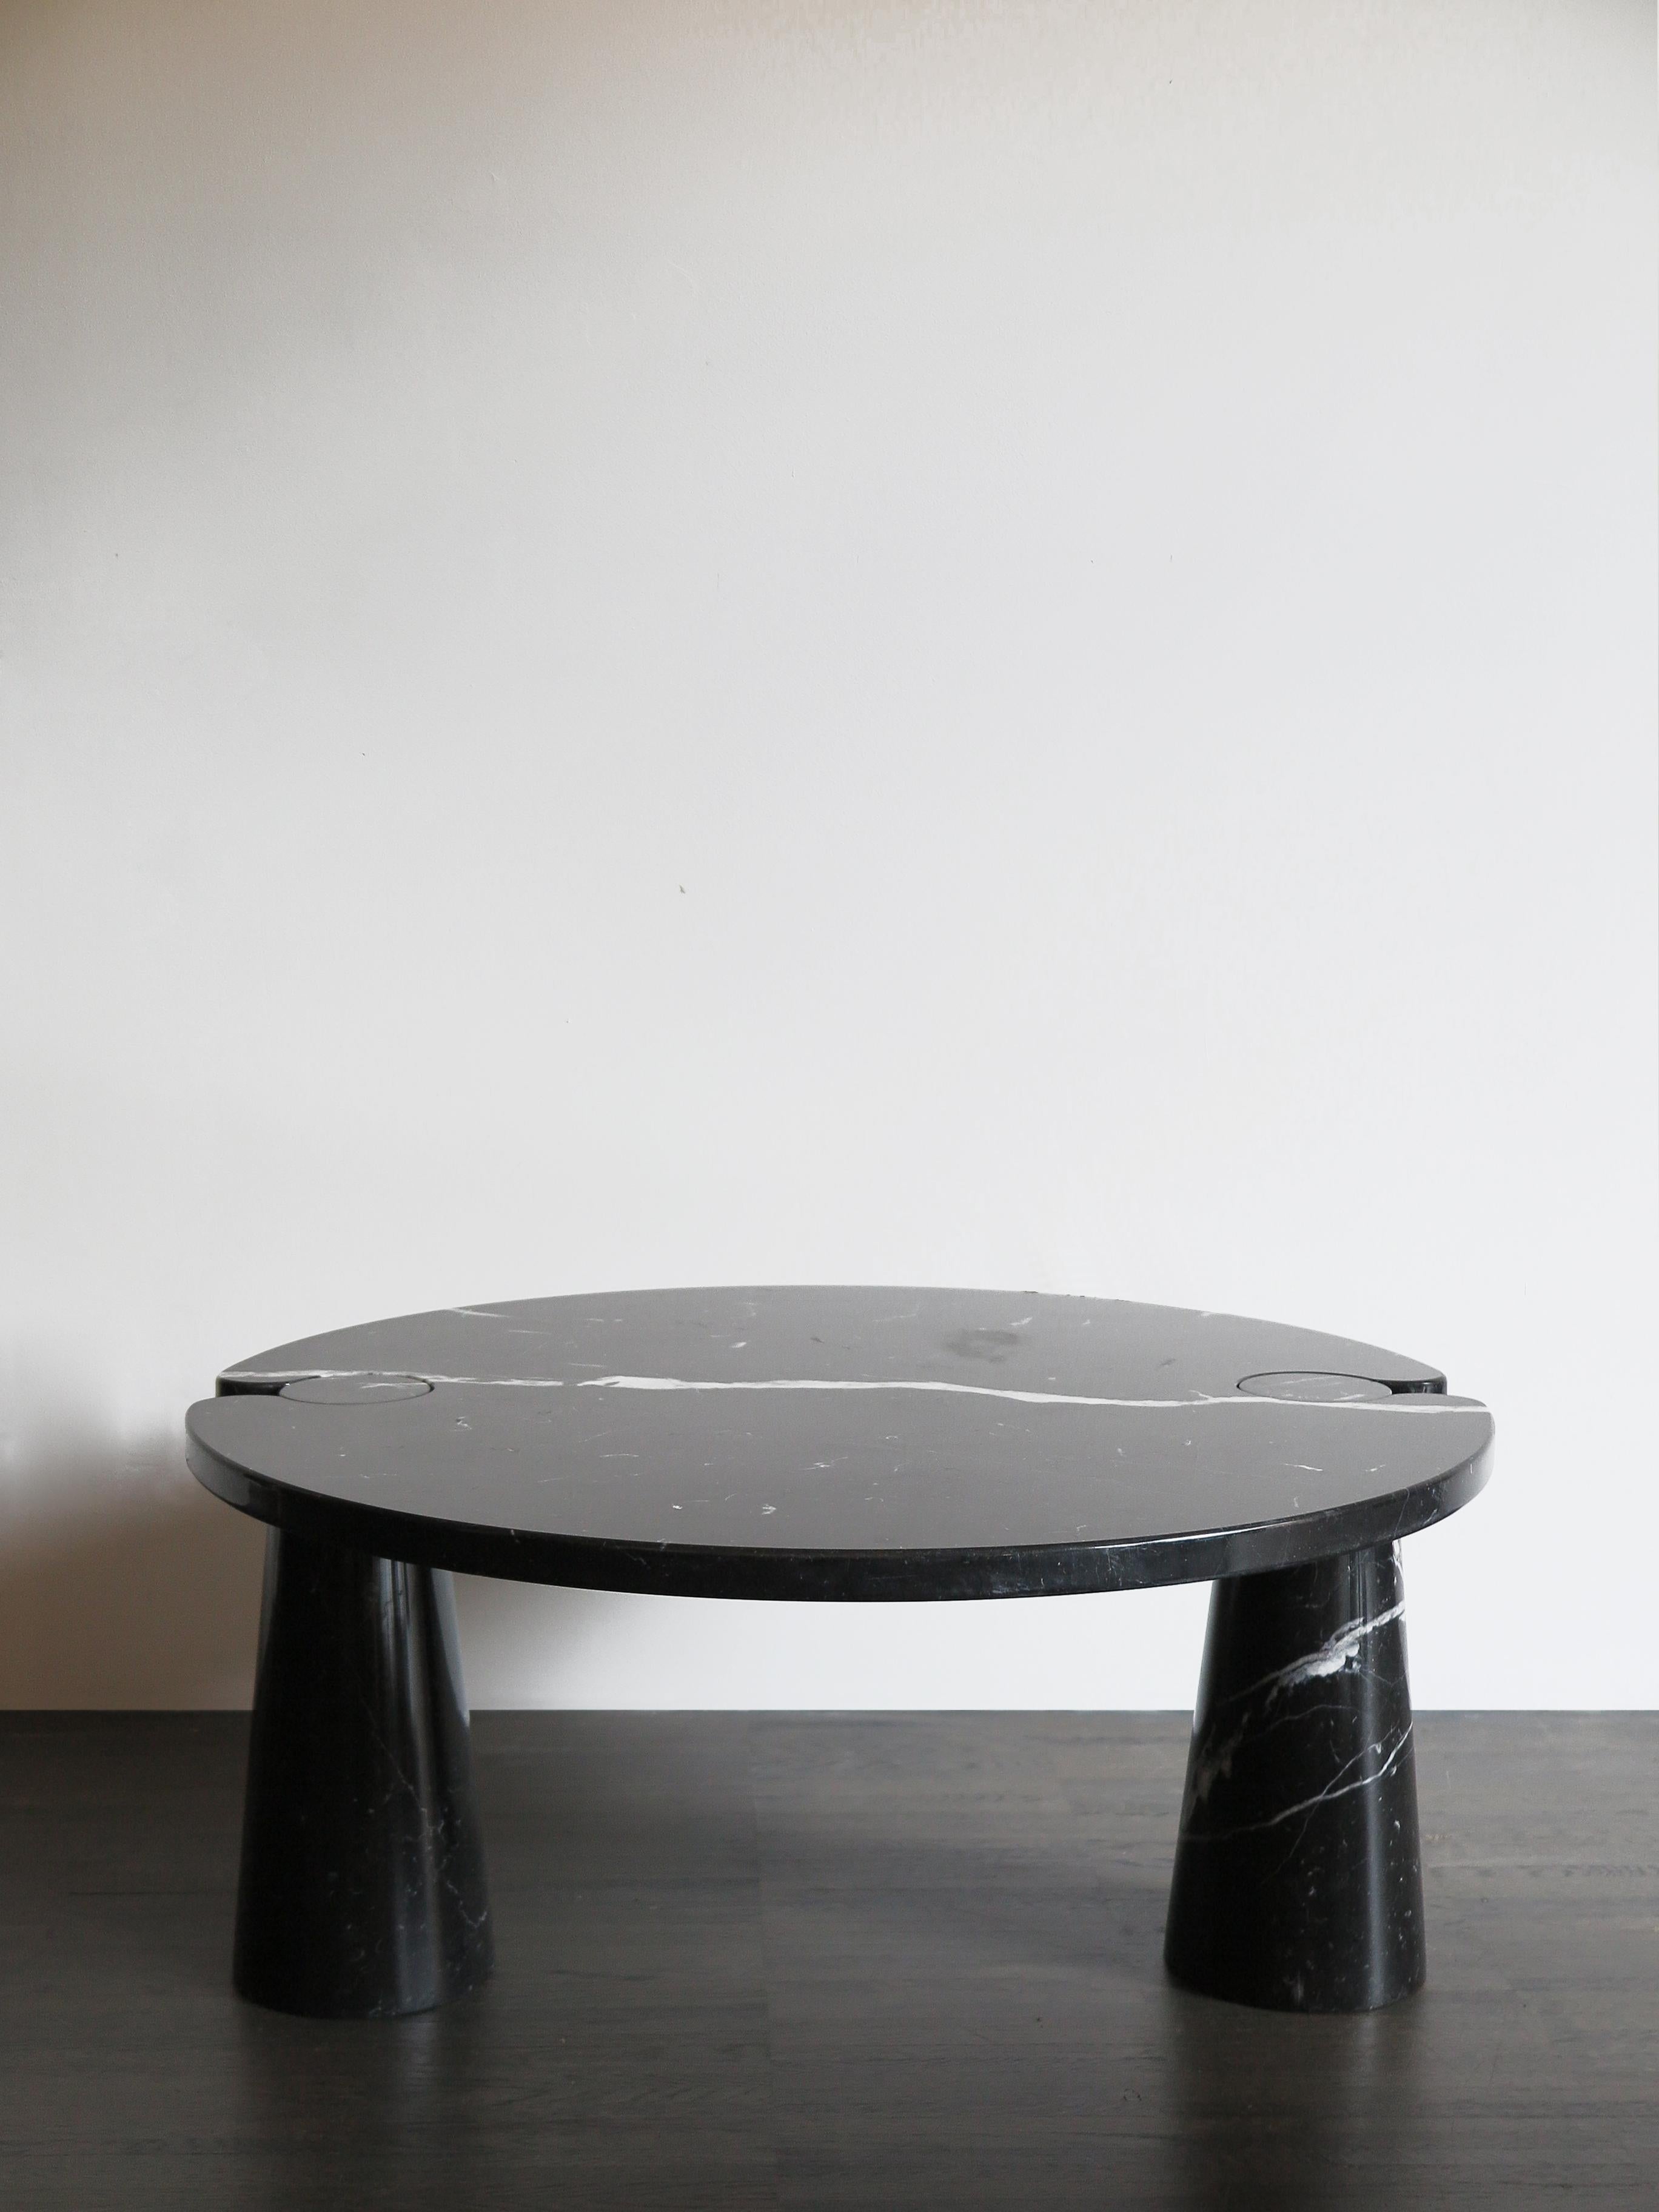 Italian coffee table or sofa table, Eros series, in Black Marquinia Marble designed by Angelo Mangiarotti for Skipper, circa 1970s.

This table of minimal and contemporary design is perfect for luxury furnishing large spaces, making the